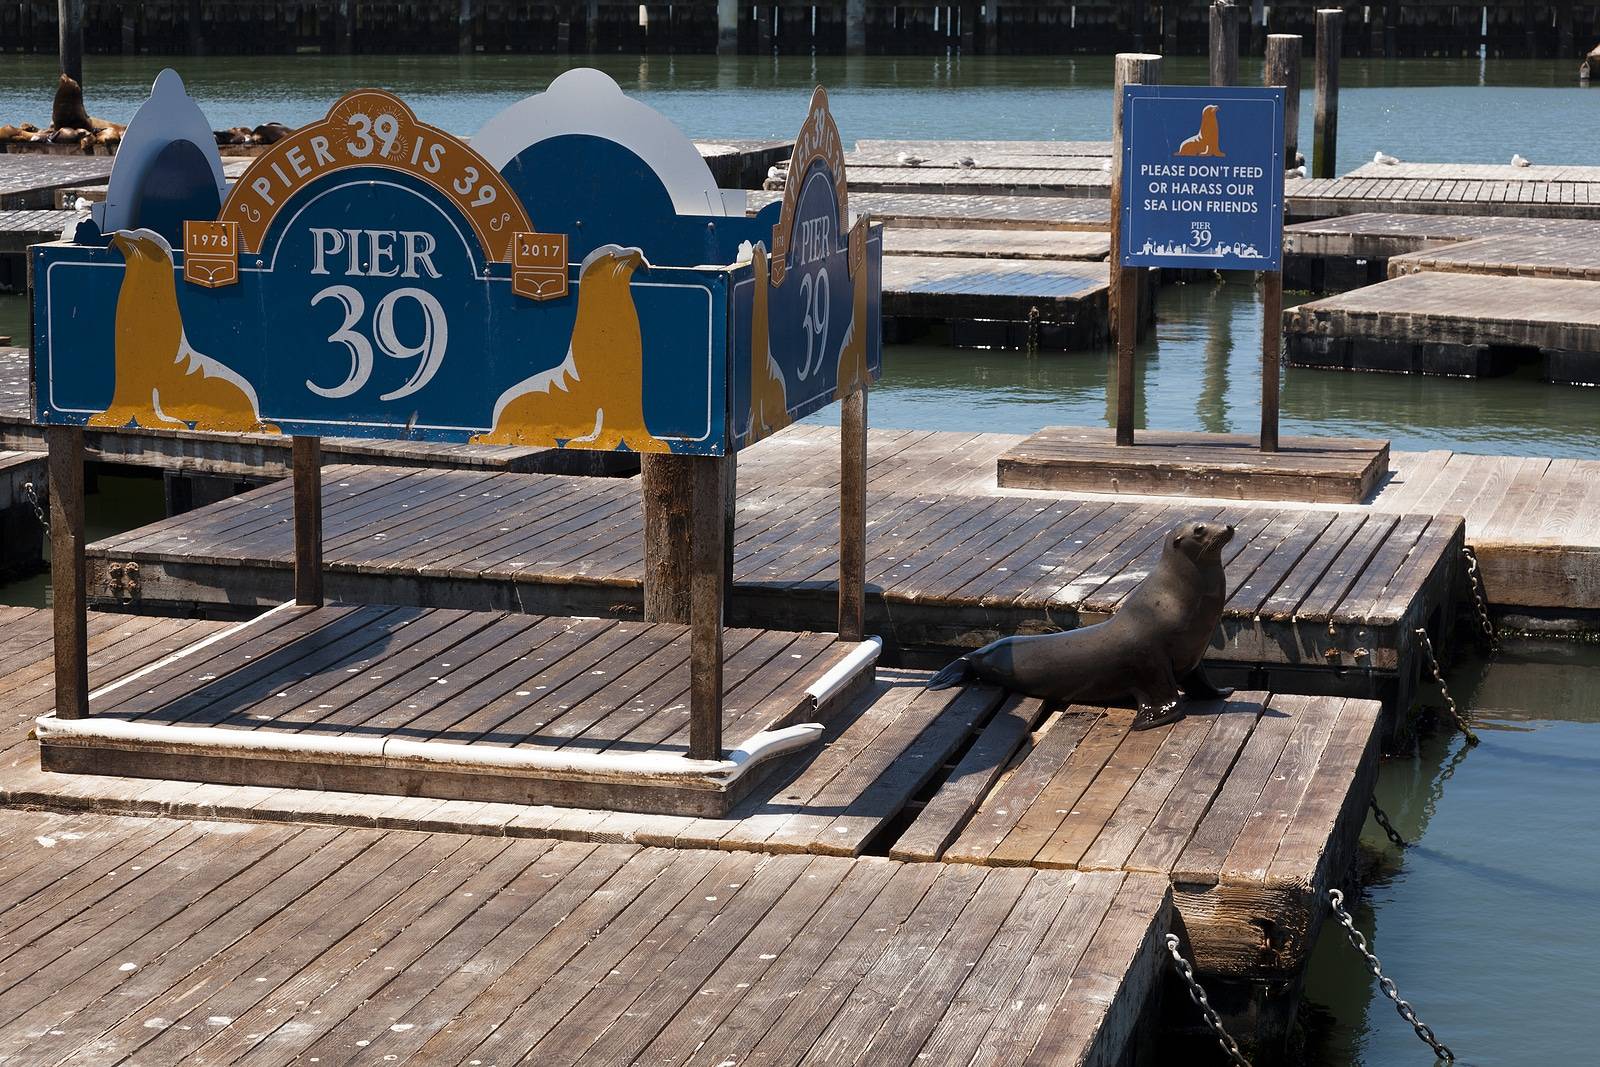 Pier 39 San Francisco, Top 3 Things to Do in San Francisco